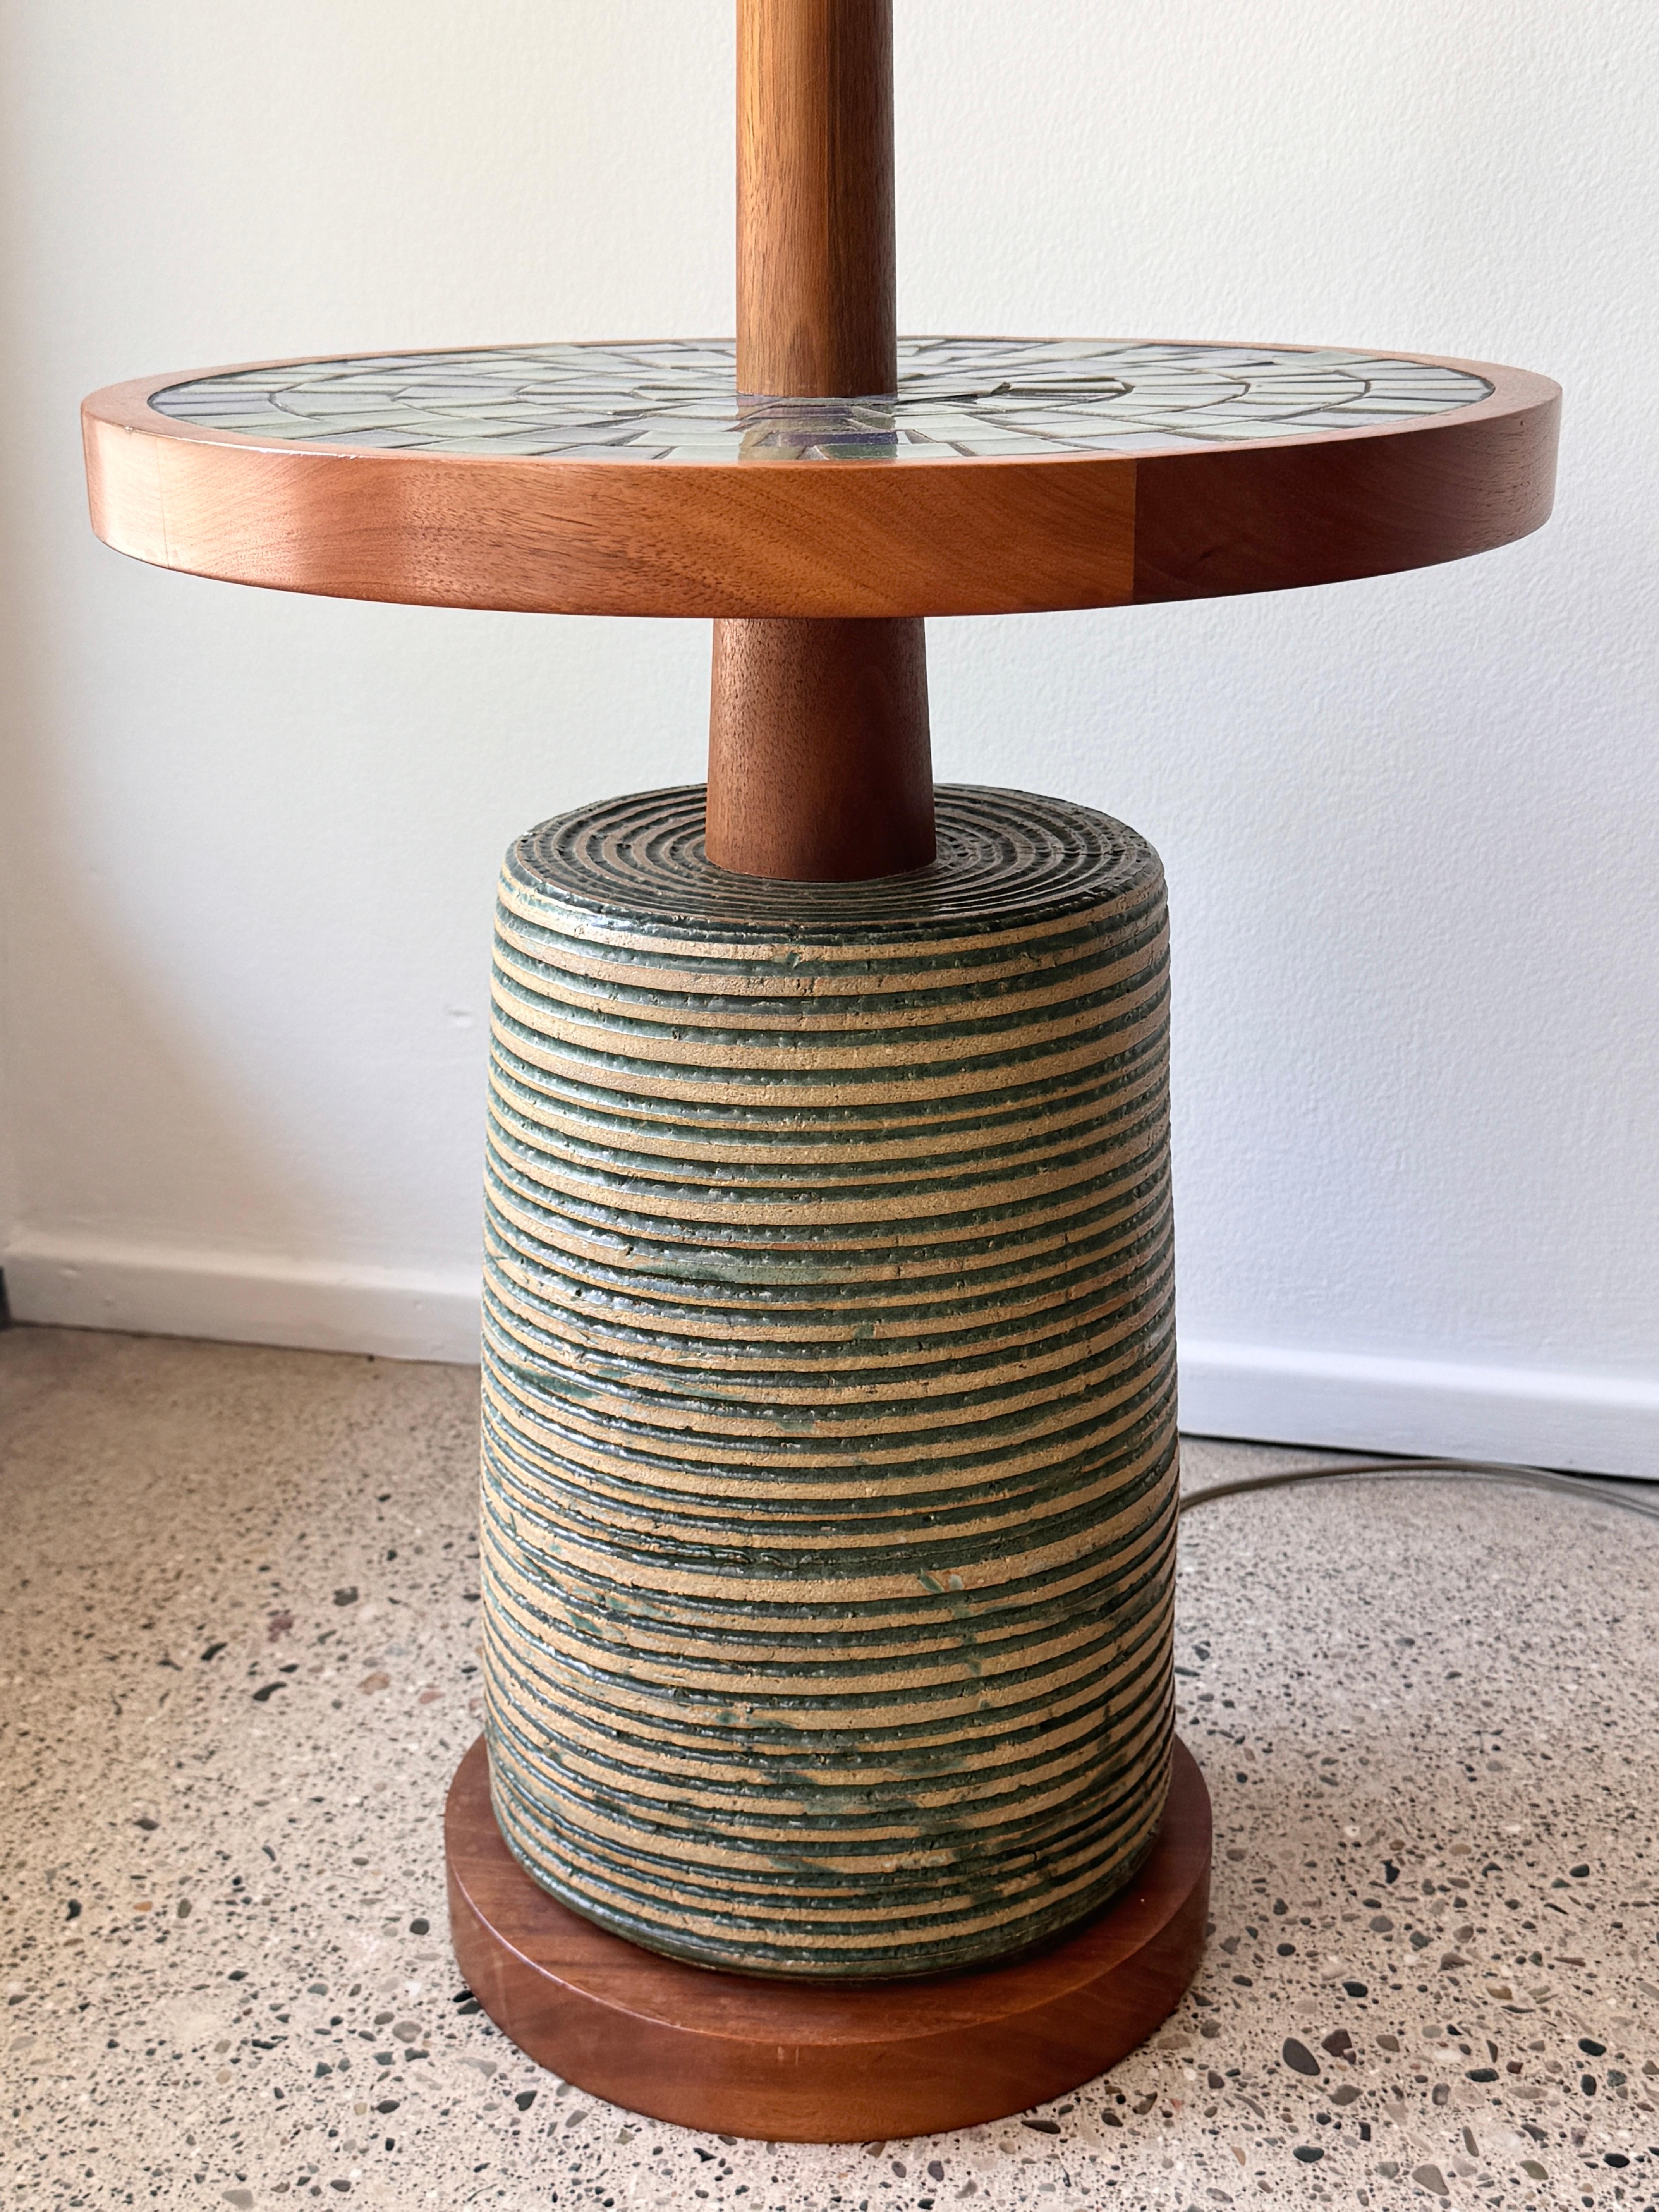 Rare Ceramic Floor Lamp w/ Mosaic Table by Gordon & Jane Martz Marshall Studios In Good Condition For Sale In Troy, MI